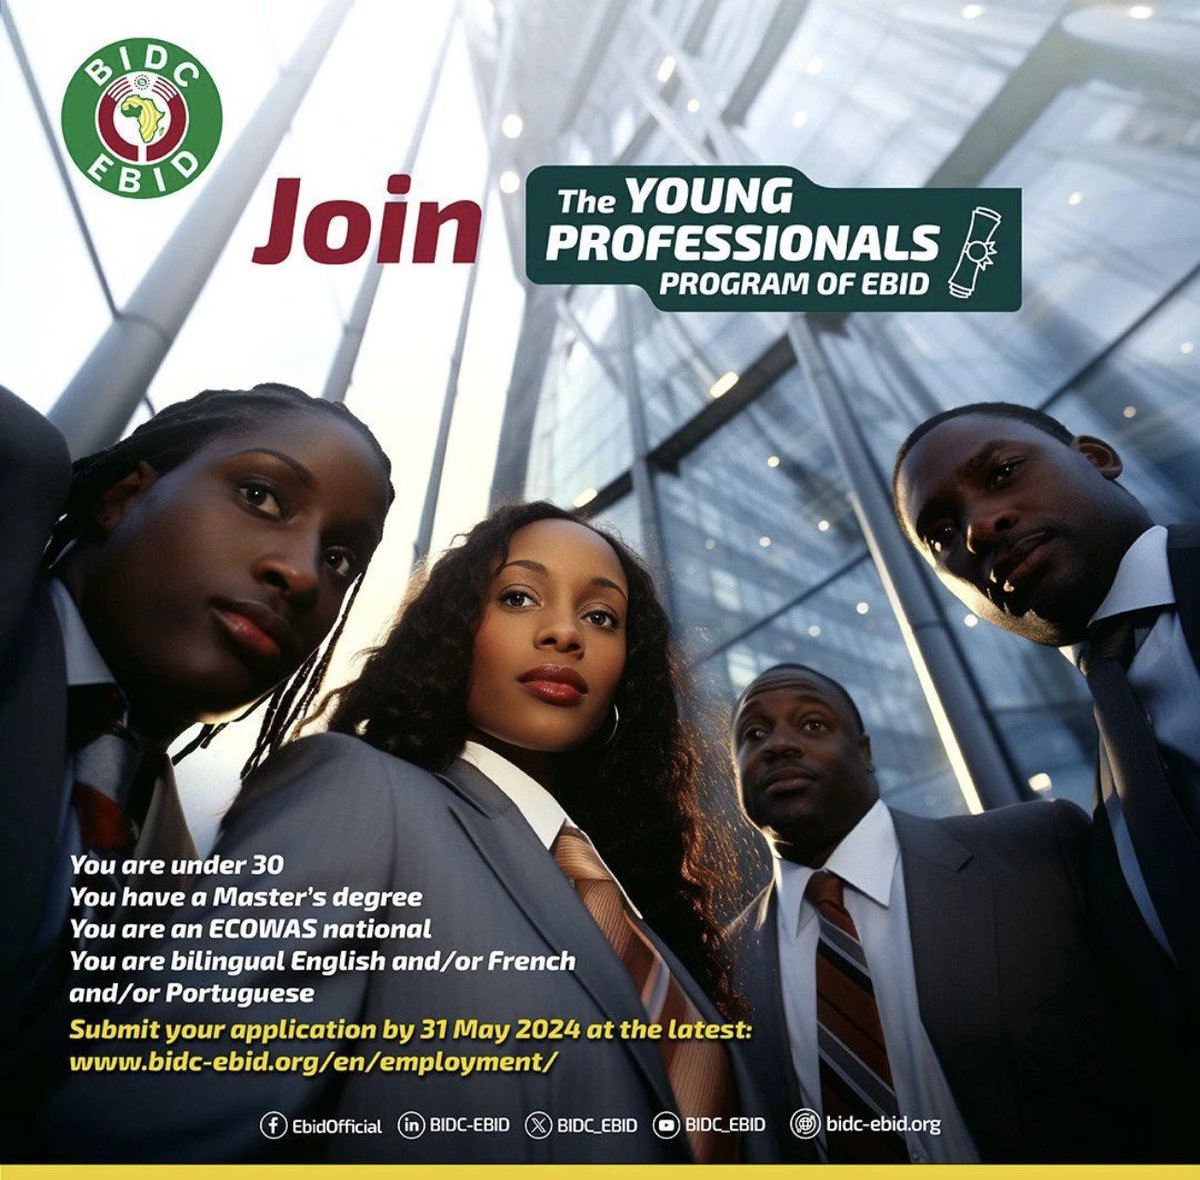 Finance career opportunities ECOWAS Bank for Investment & Development (EBID) is seeking to recruit ambitious young graduates under 30 from West Africa or the diaspora. Join EBID Young Professionals Programme for top-notch training. Apply by May 31, 2024! Get more details